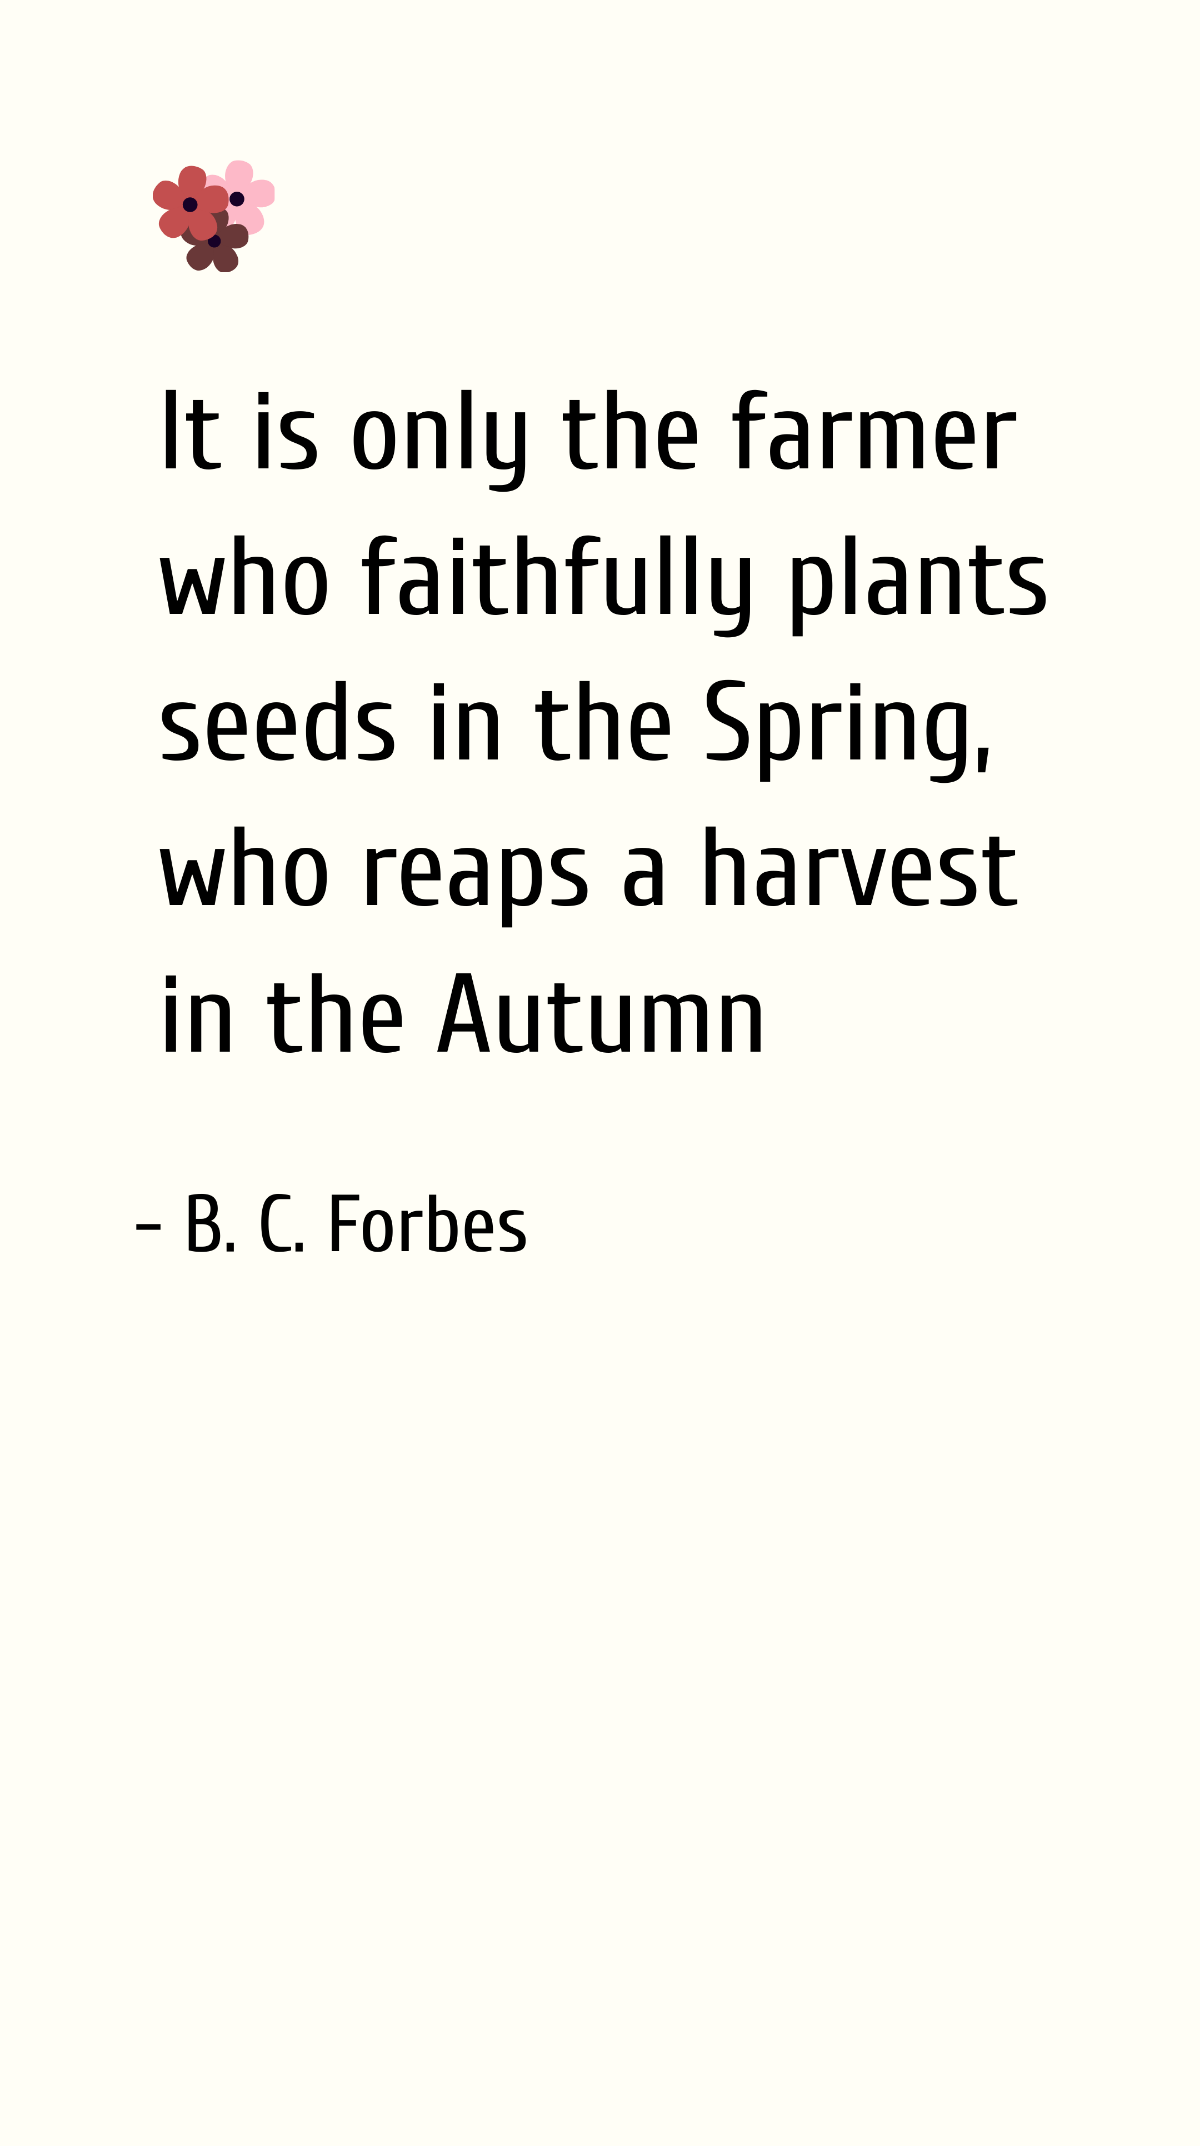 B. C. Forbes - It is only the farmer who faithfully plants seeds in the Spring, who reaps a harvest in the Autumn Template